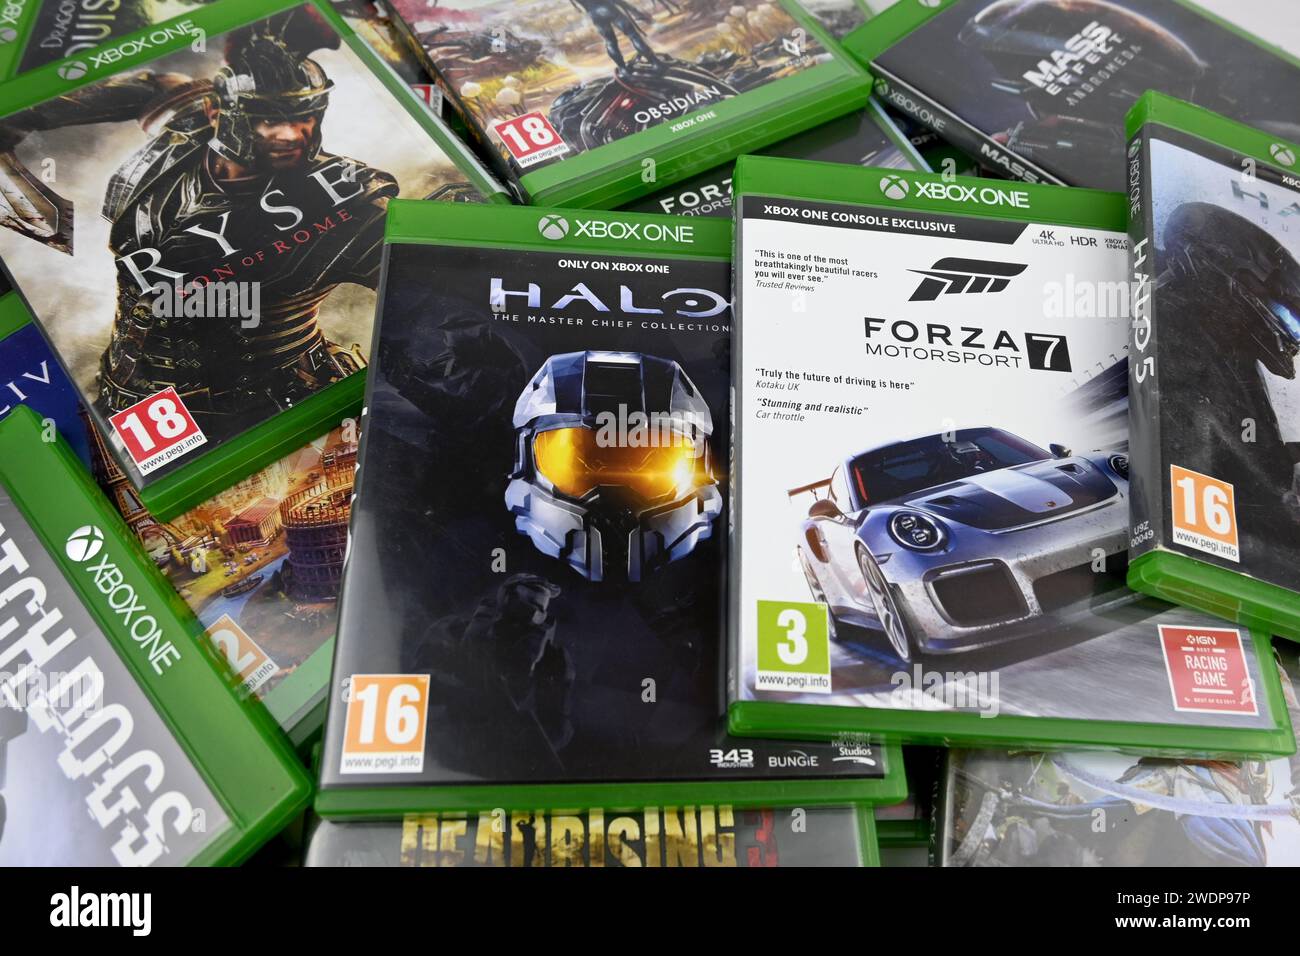 Microsoft Xbox One video games selection editorial image Wales, UK